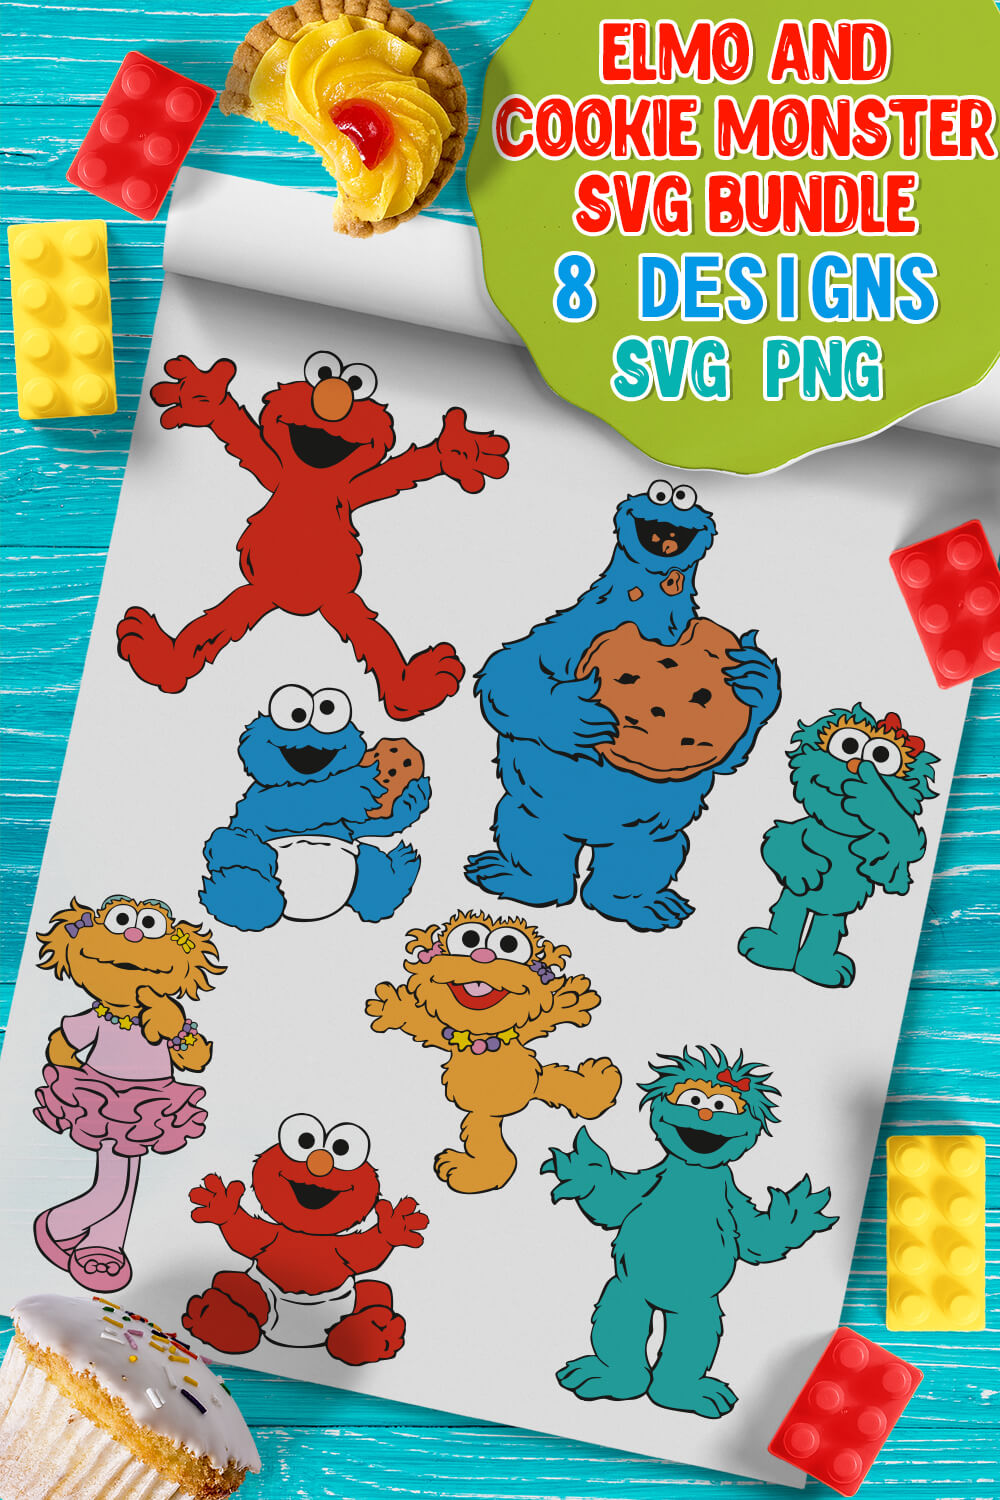 Elmo and Cookie Monster: 8 Designs.